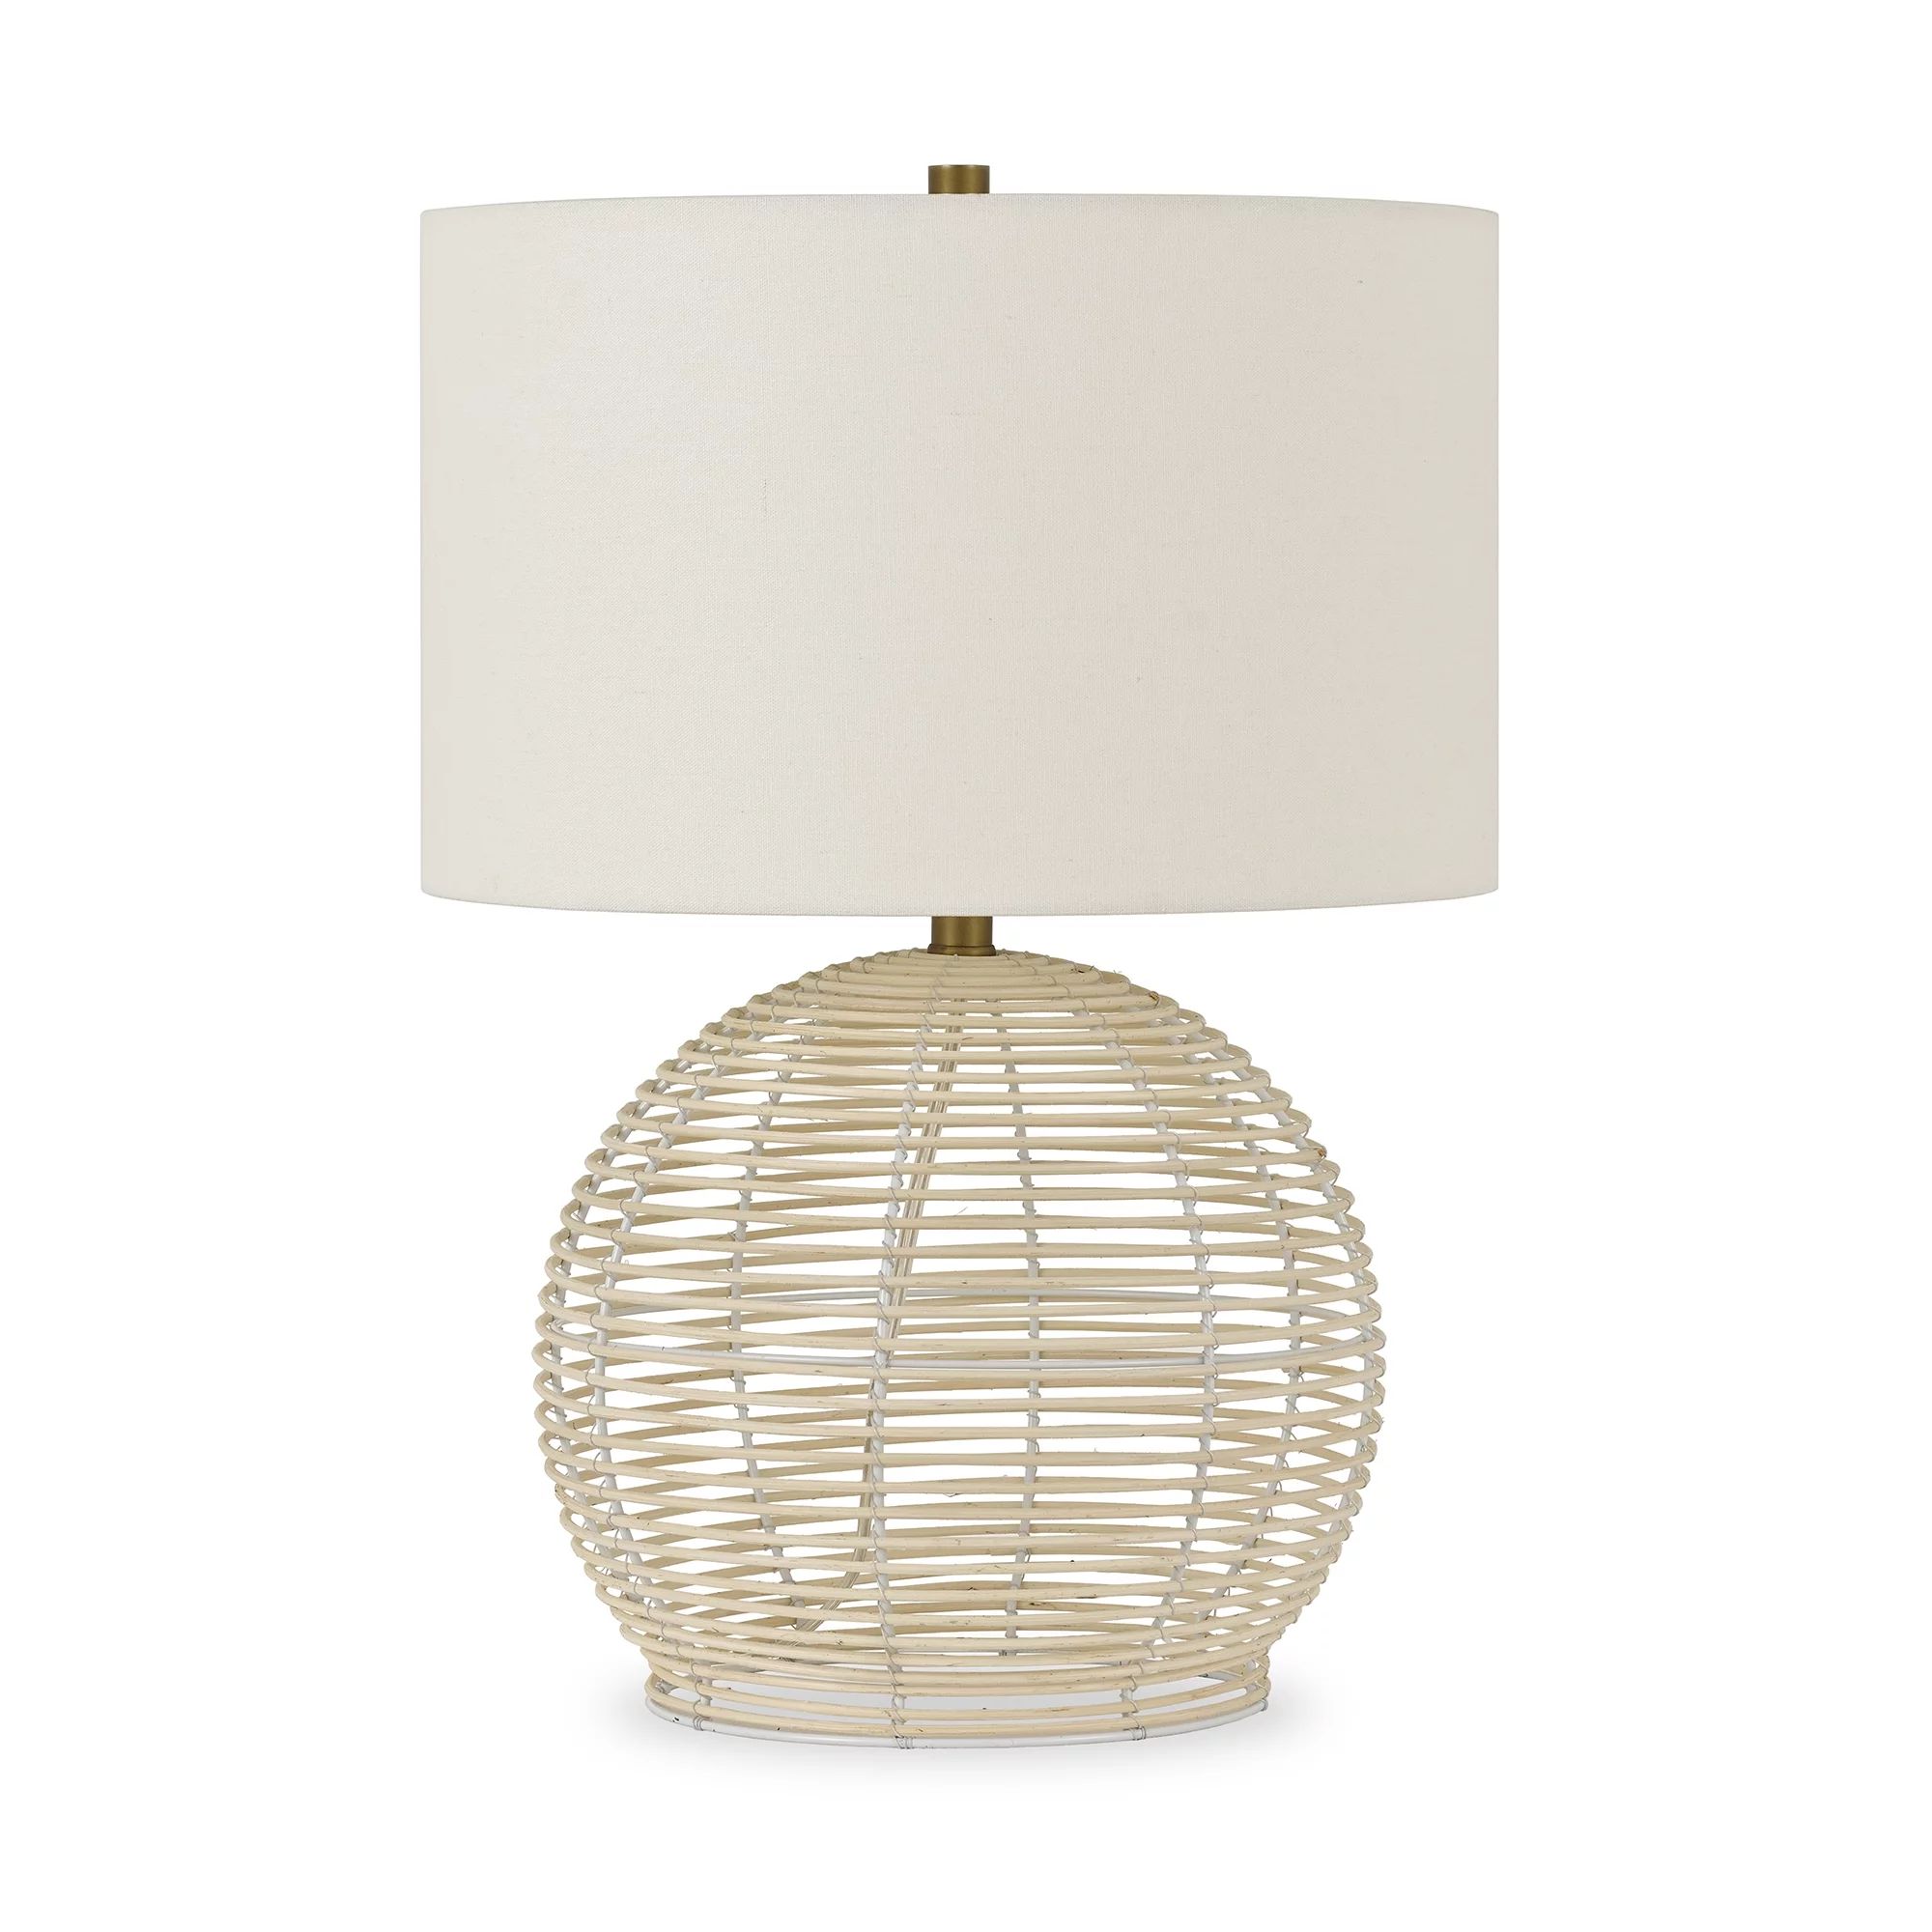 Evelyn&Zoe 21" Coastal Rattan Table Lamp with White Drum Linen Shade | Walmart (US)